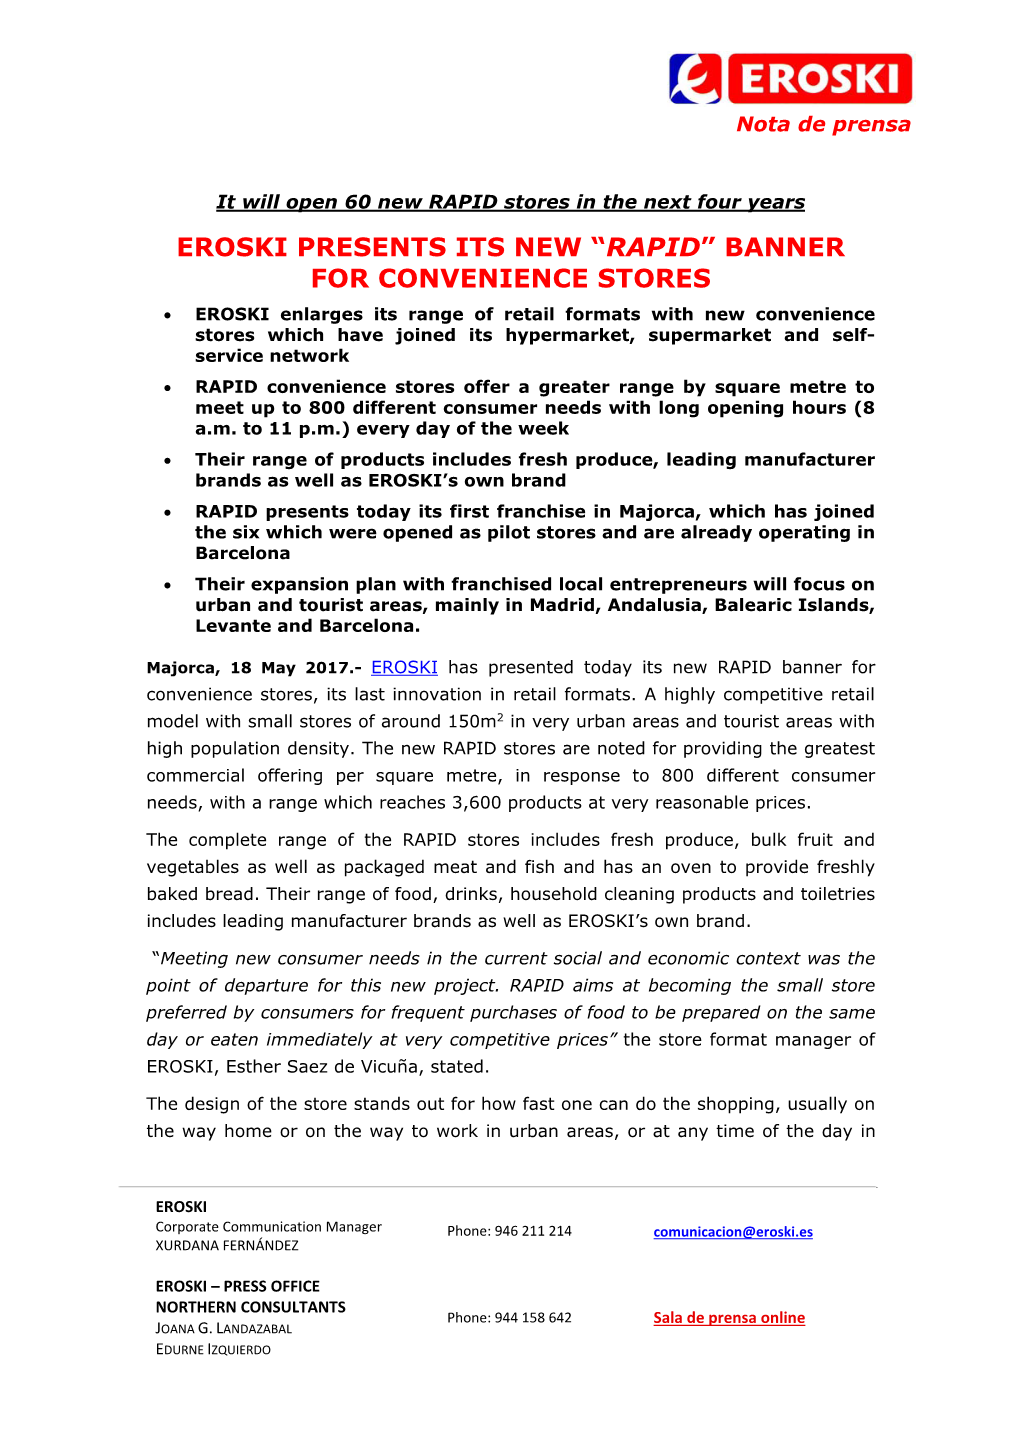 Eroski Presents Its New “Rapid” Banner For